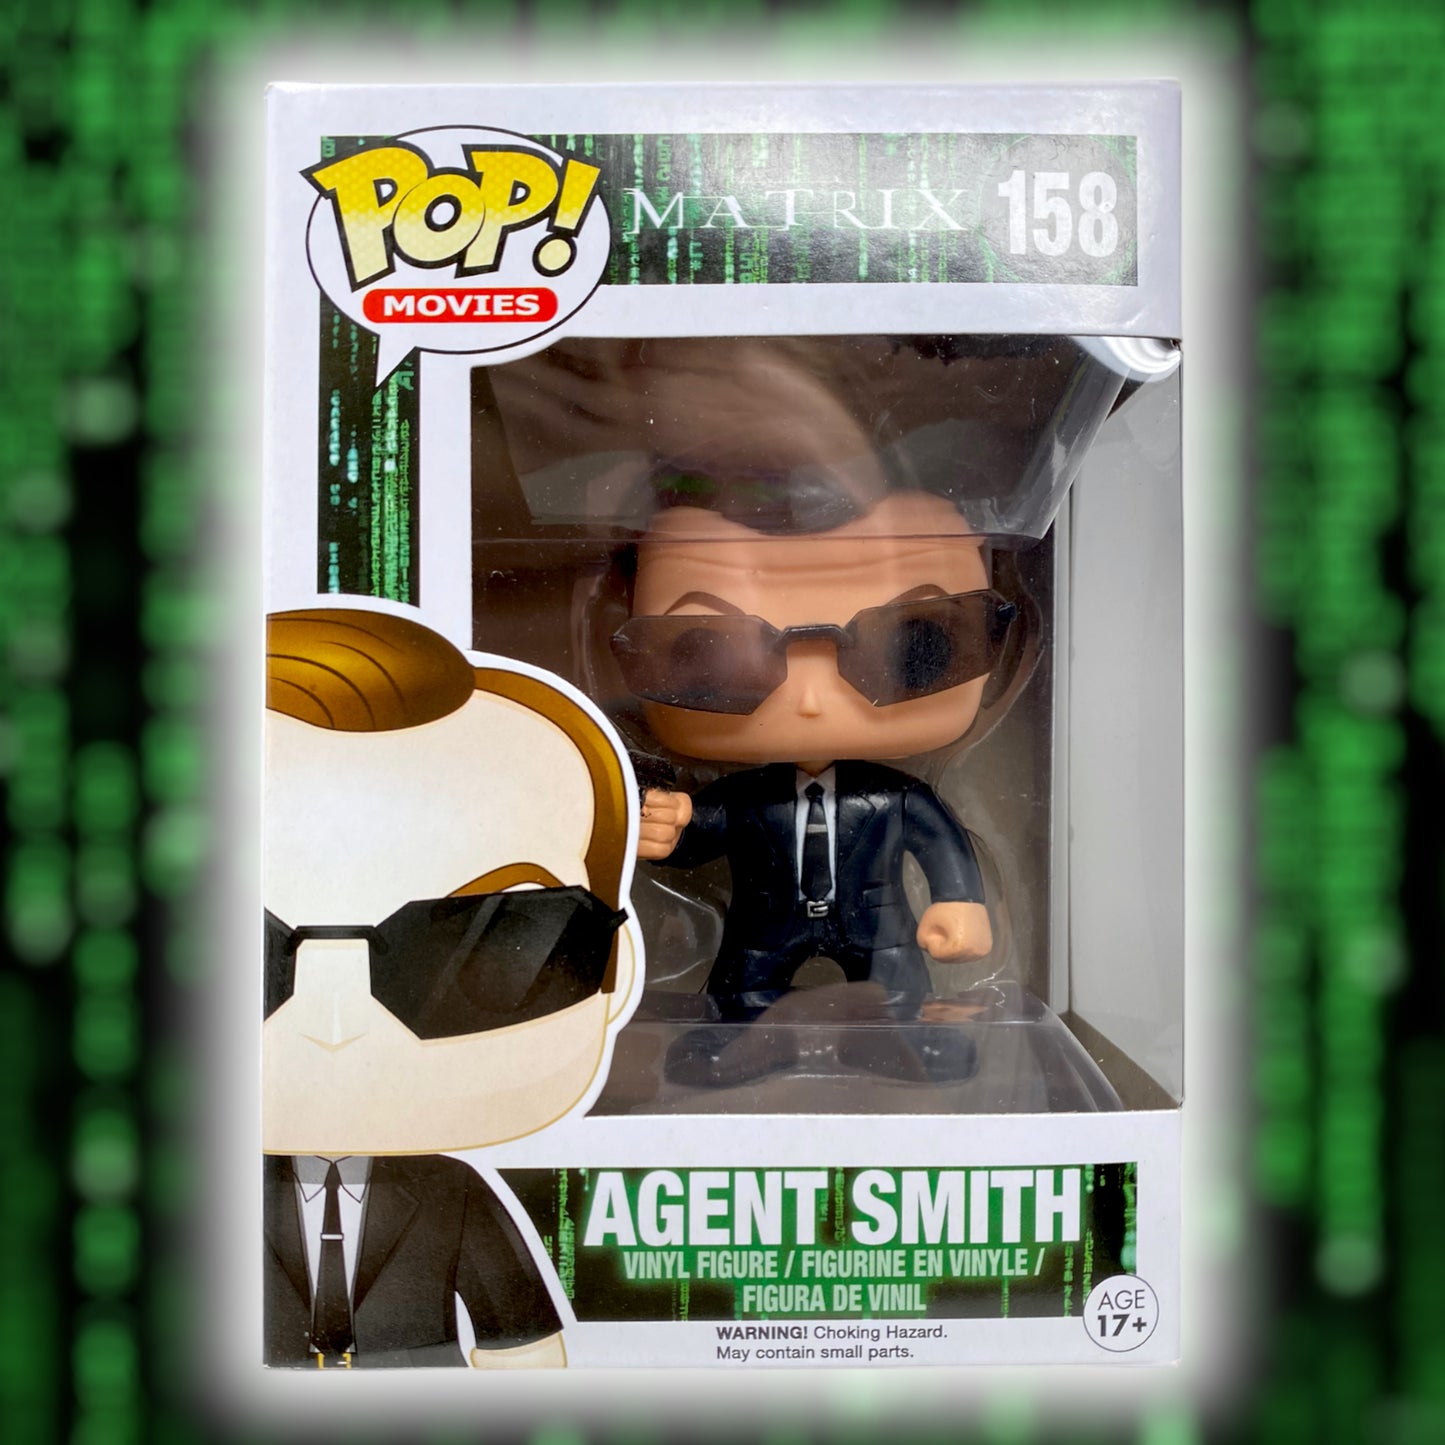 Sold 2015 Agent Smith 158